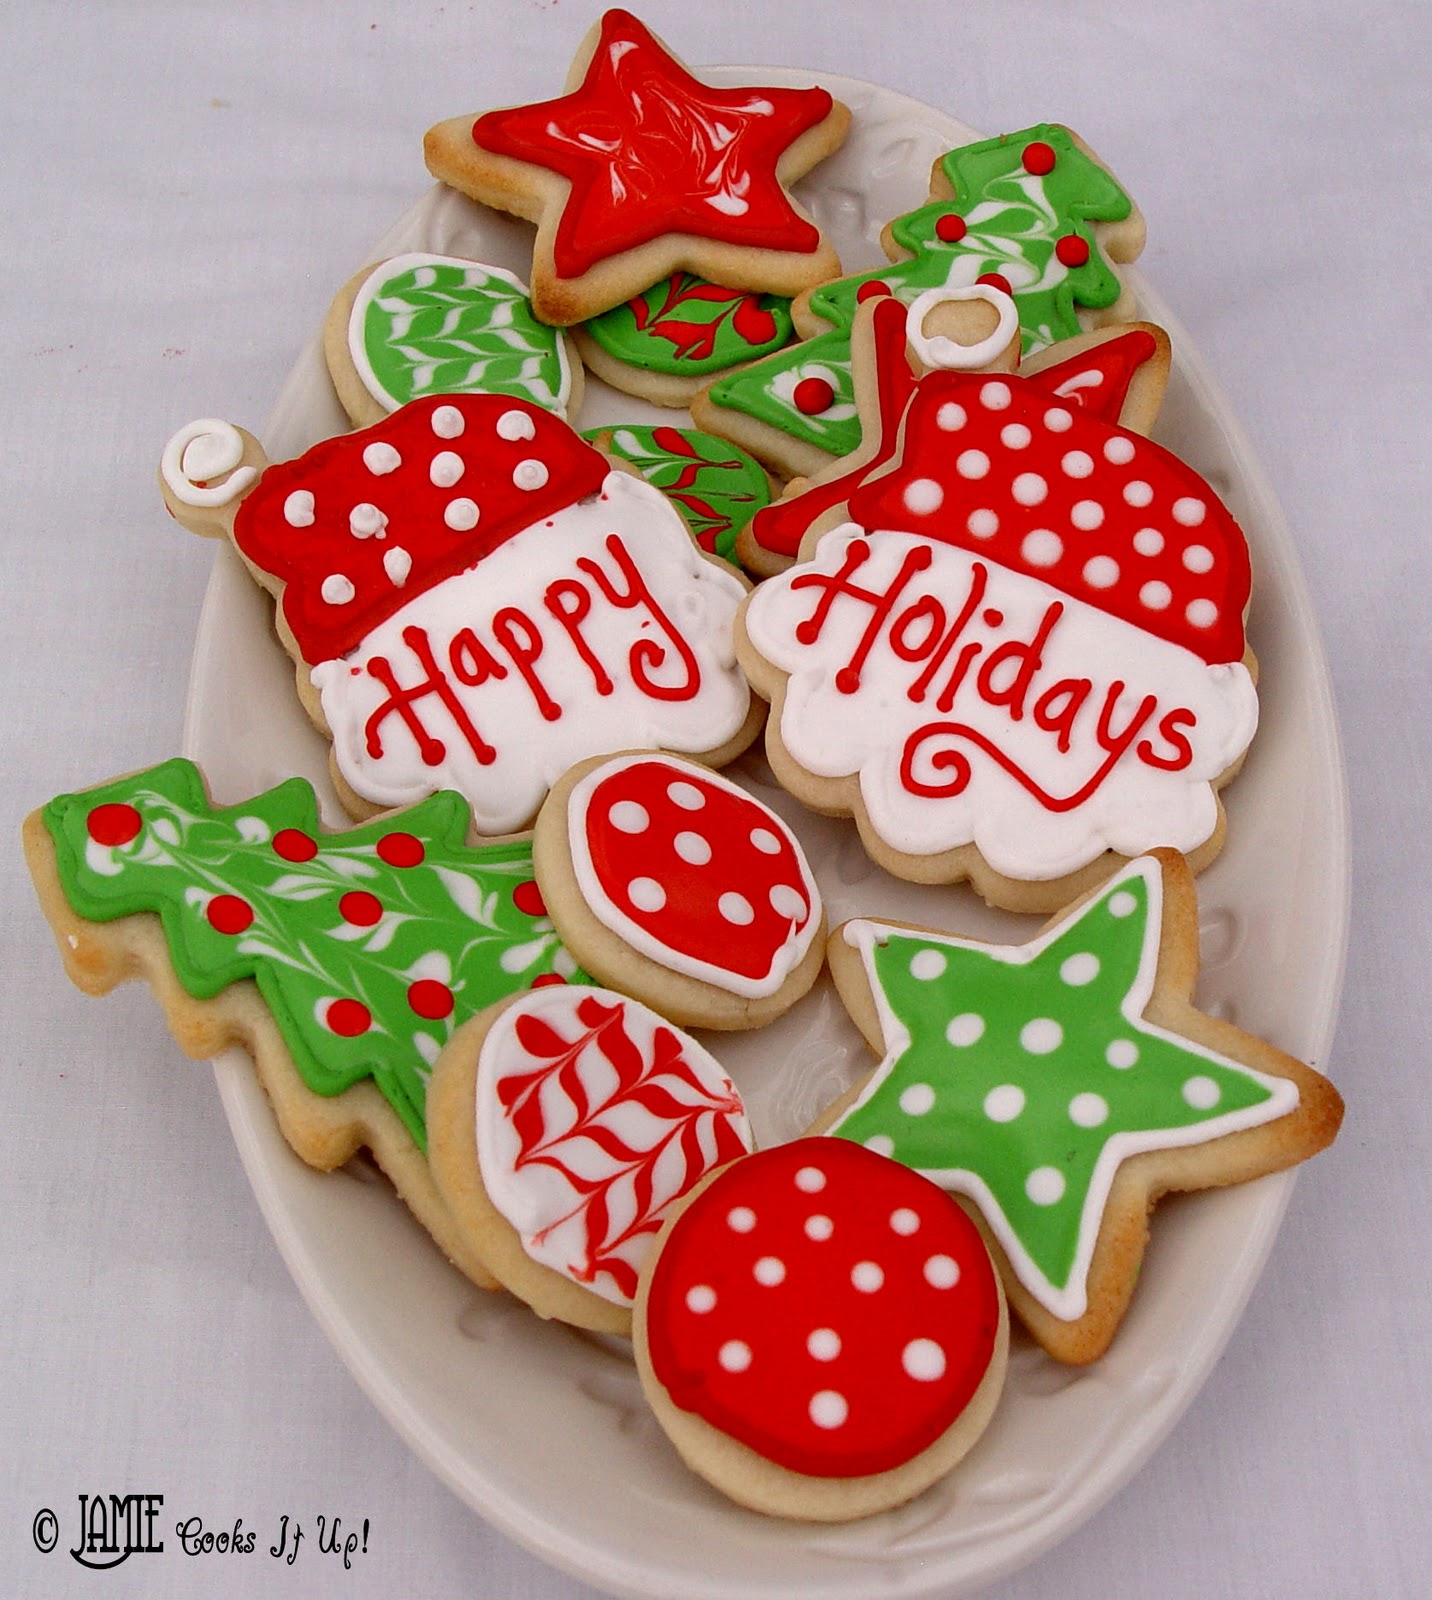 48 HQ Pictures Pictures Of Decorated Christmas Sugar Cookies - Candy Decorated Christmas Sugar Cookies